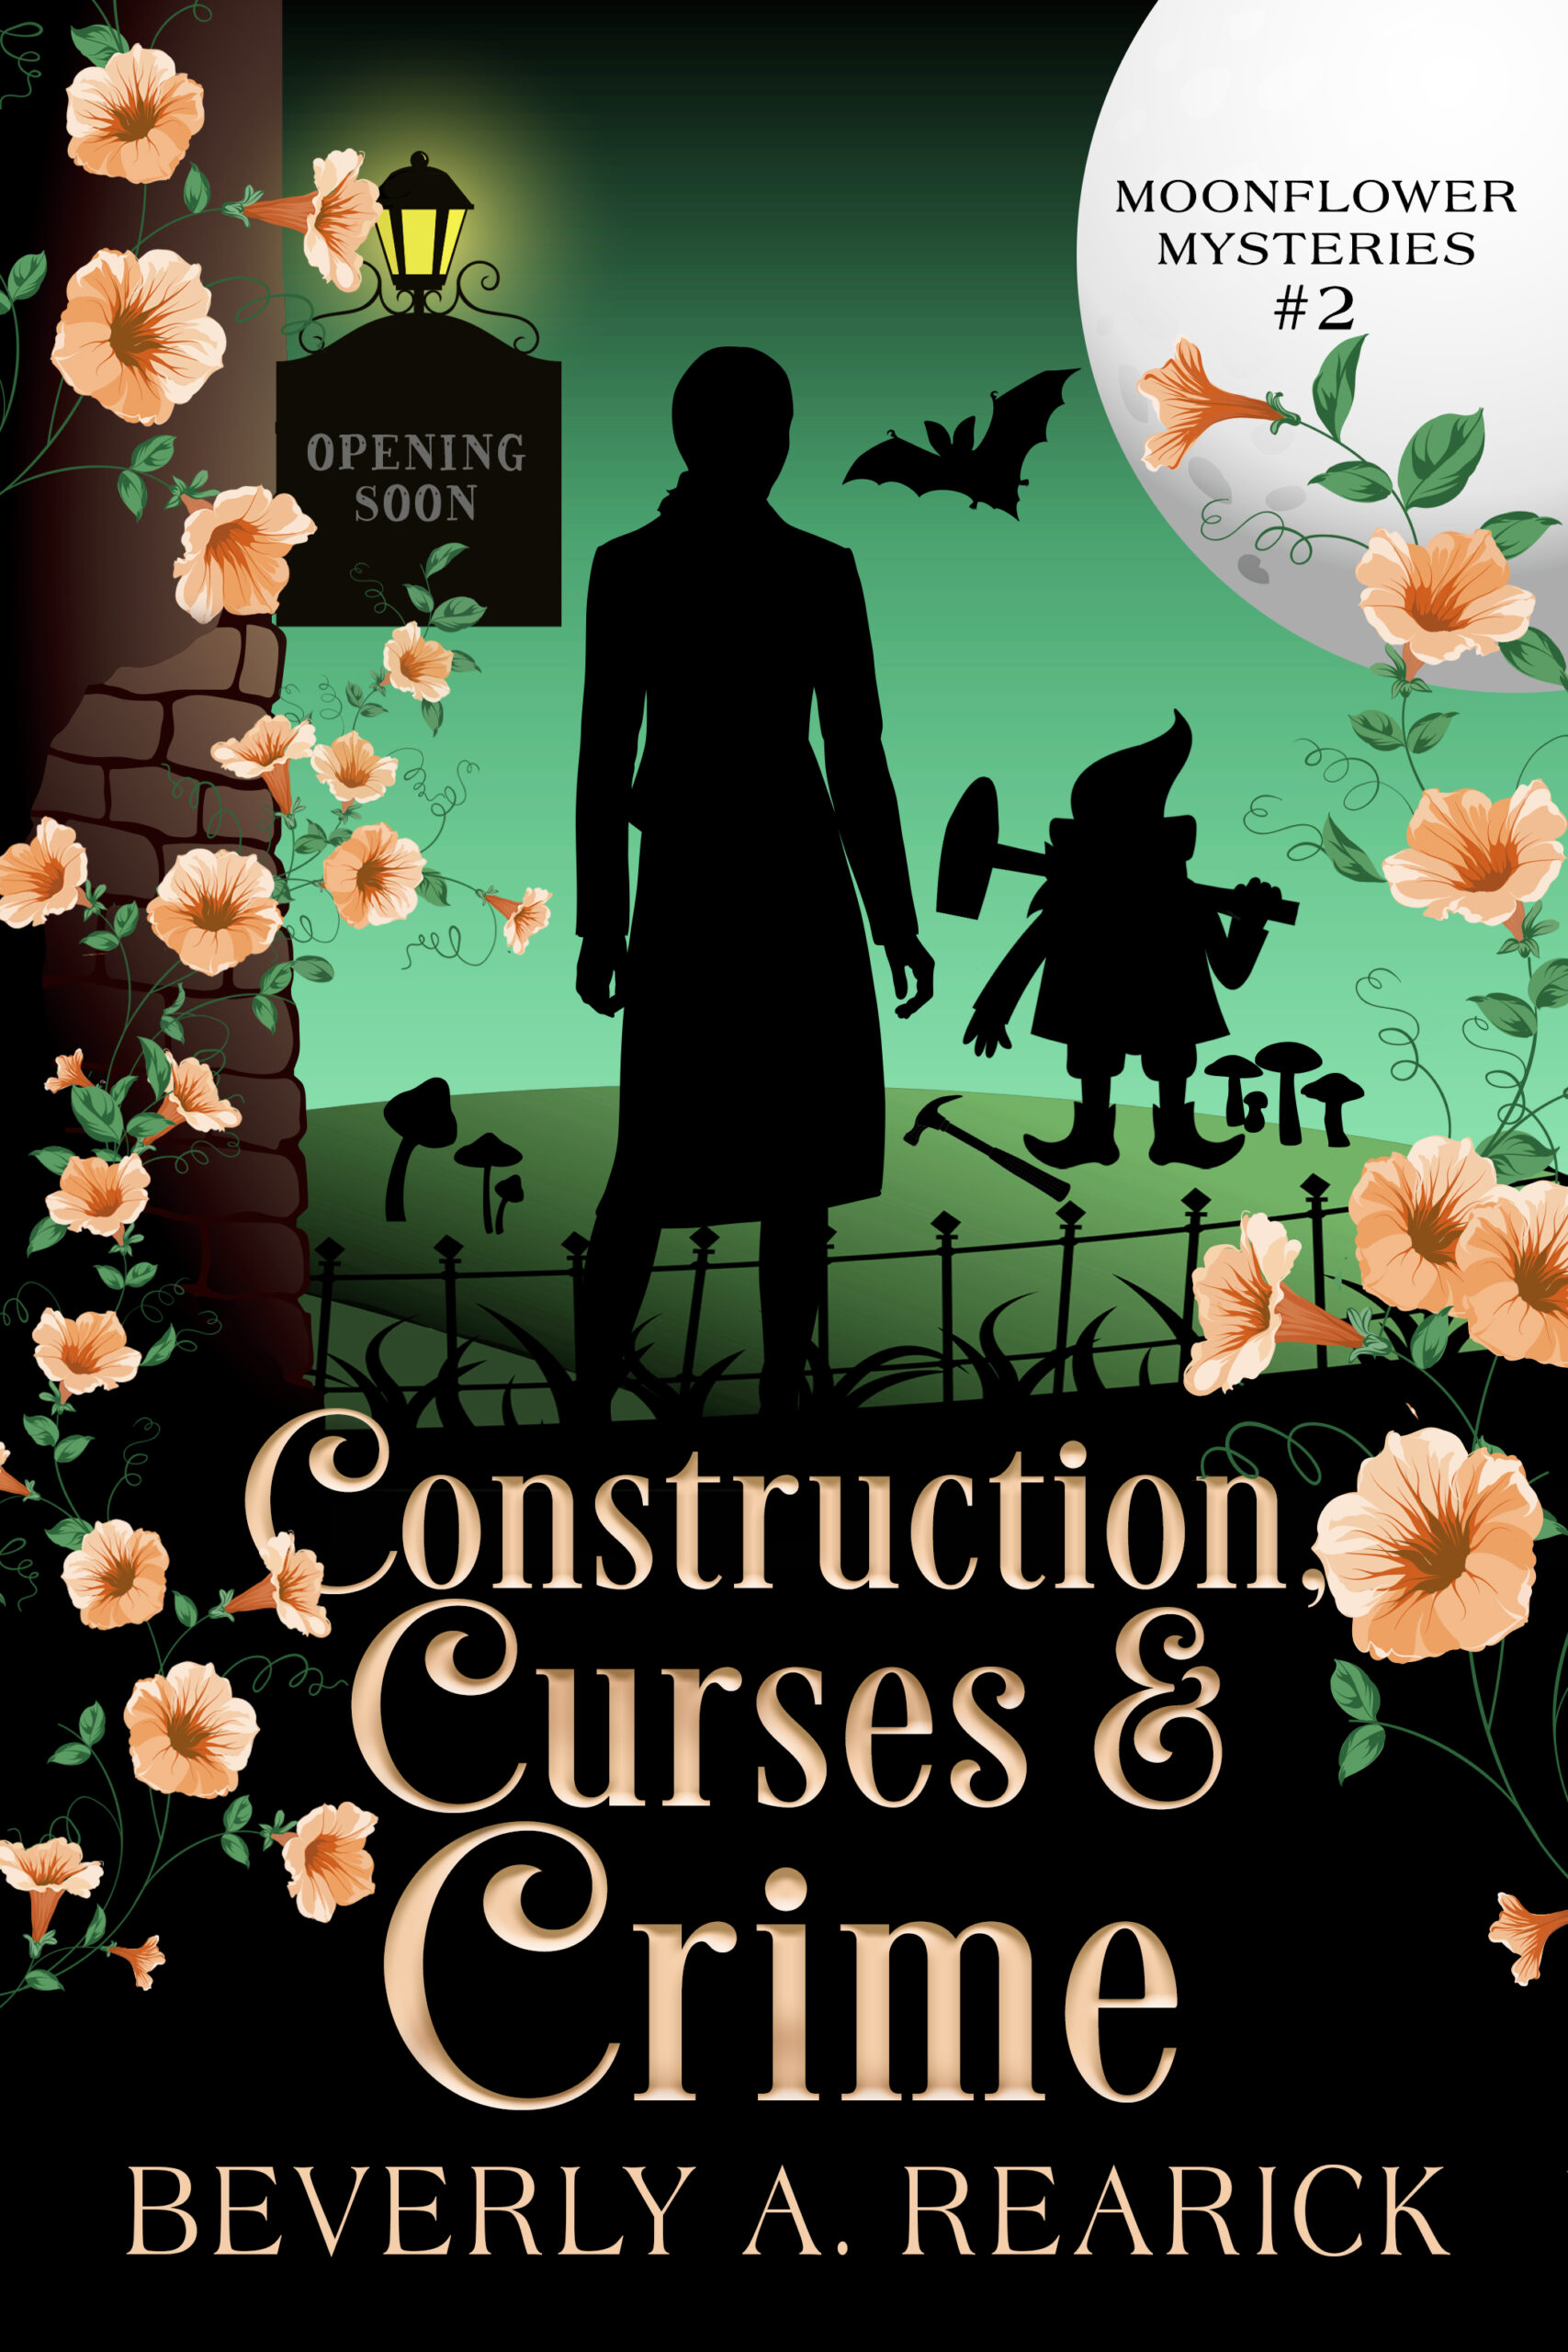 FREE: Construction, Curses & Crime by Beverly A. Rearick